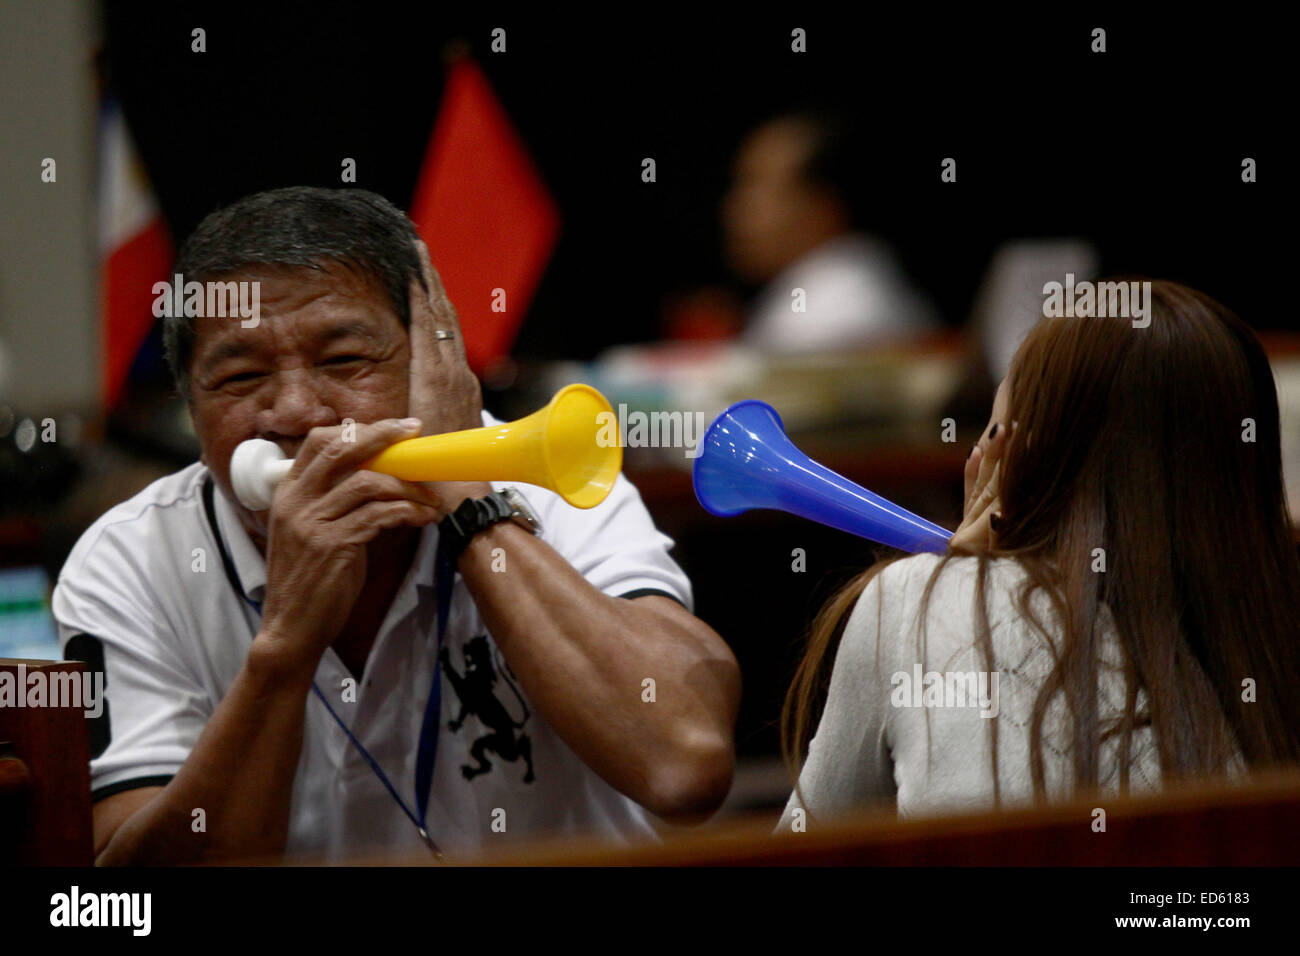 (141229) -- MAKATI CITY, Dec. 29, 2014 (Xinhua) -- Traders blow toy trumpets during the last trading day of 2014 at the Philippine Stock Exchange in Makati City, the Philippines, Dec. 29, 2014. Philippine stock index rose 0.62 percent on its last trading day for the year. It ended the year at a two-week high of 7,230.57, rising 22.8 percent in 2014, among the region's outperformers.(Xinhua/Rouelle Umali)(zhf) Stock Photo